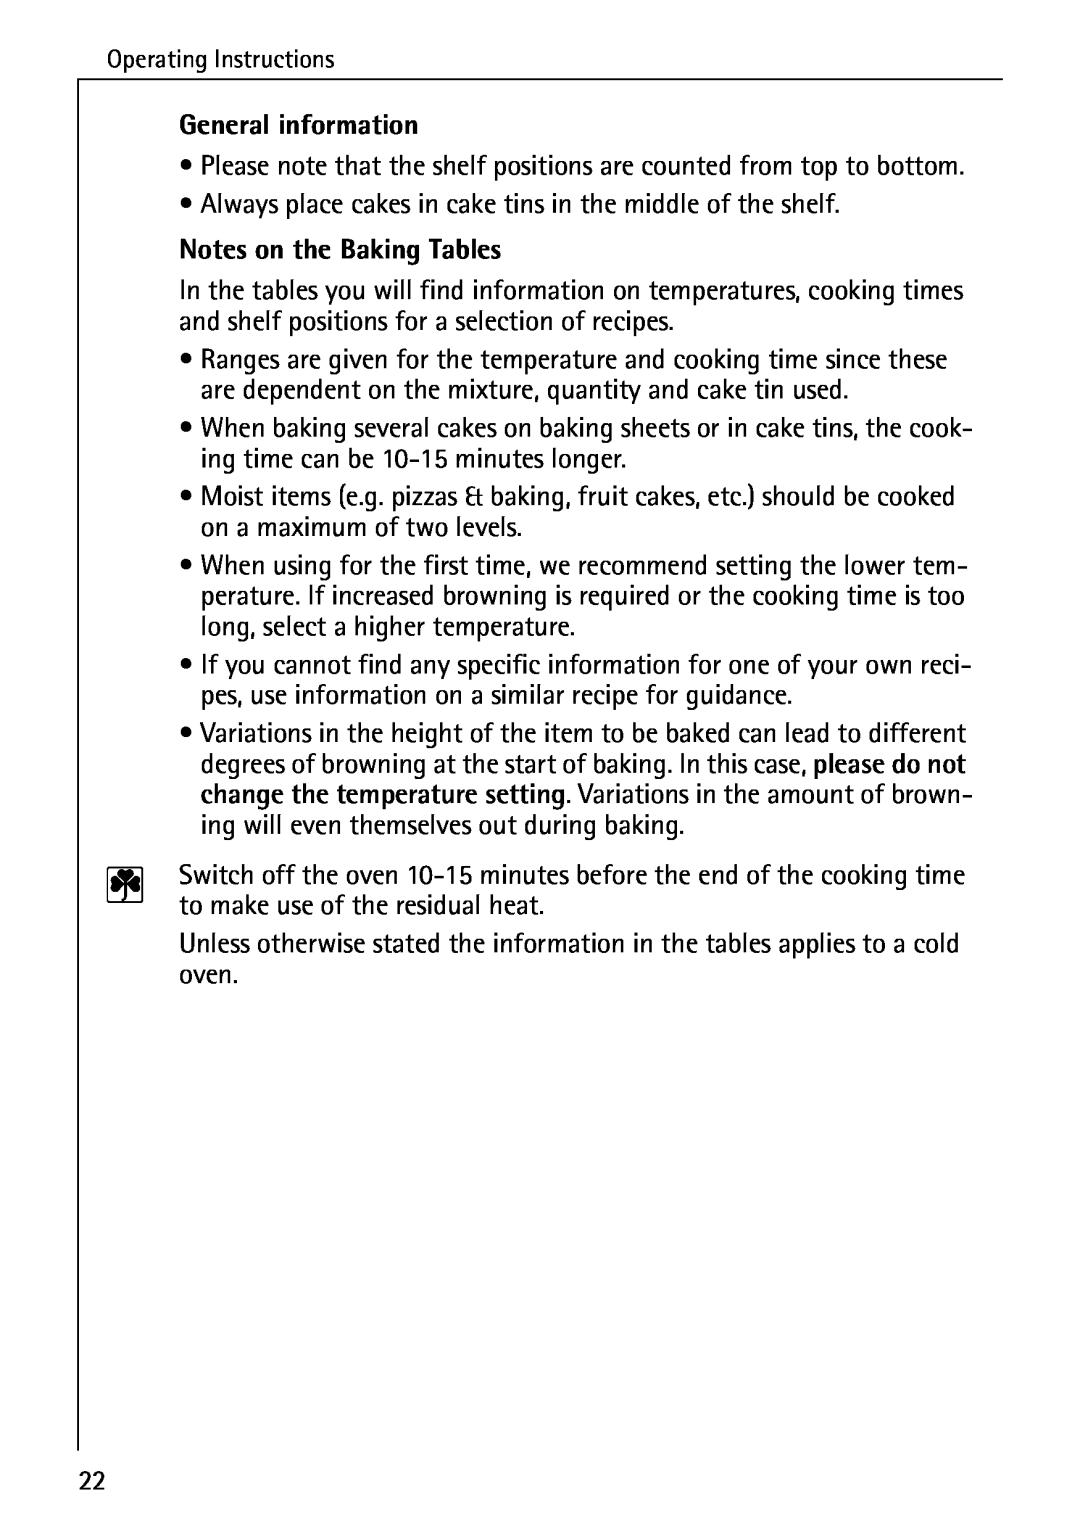 AEG B 2100 operating instructions General information, Notes on the Baking Tables 